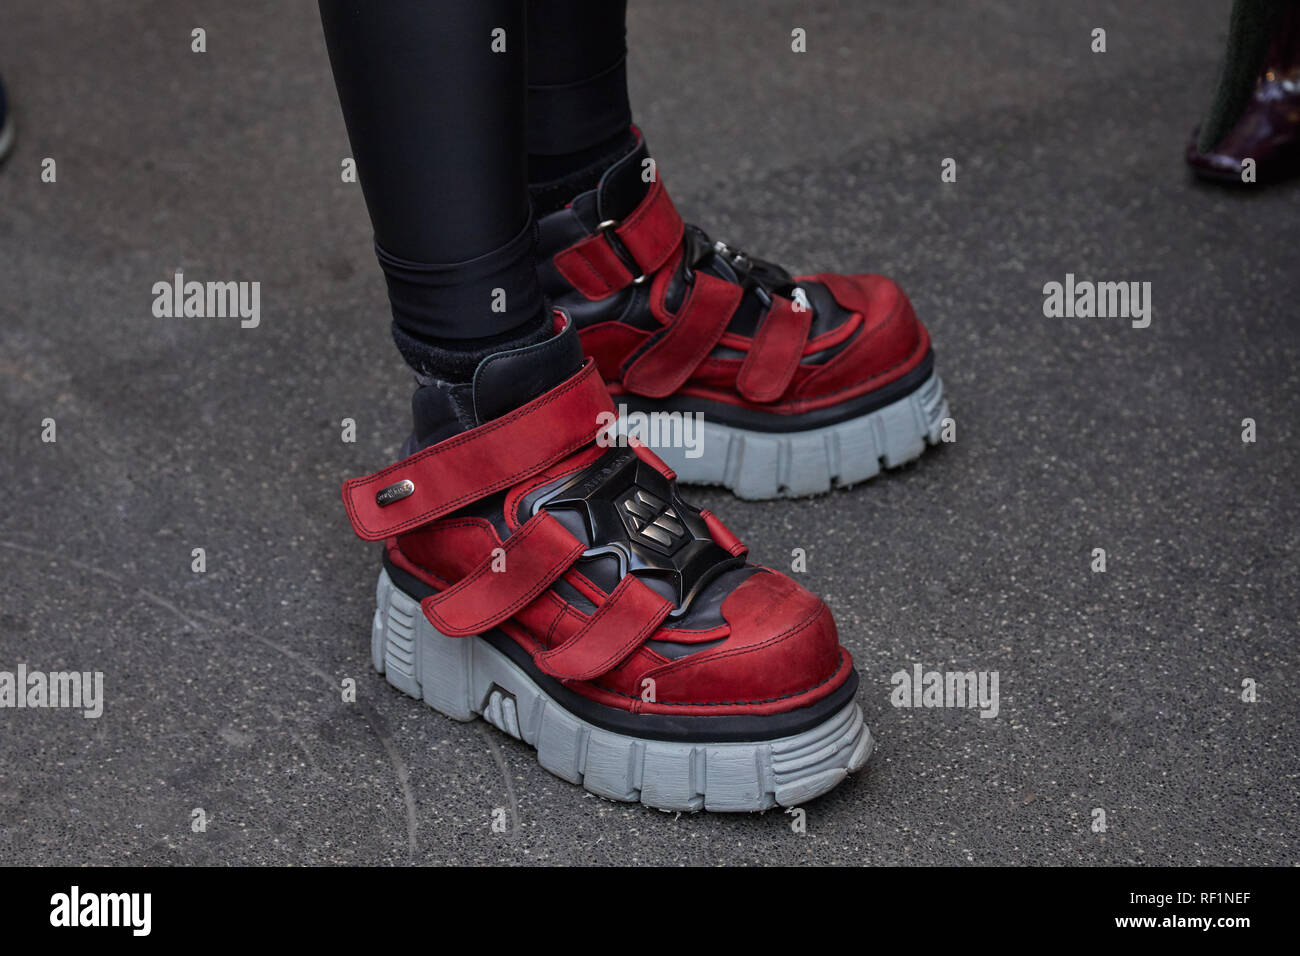 MILAN, ITALY - JANUARY 13, 2019: Woman with New Rock red and gray shoes before John Richmond fashion show, Milan Fashion Week street style Stock Photo